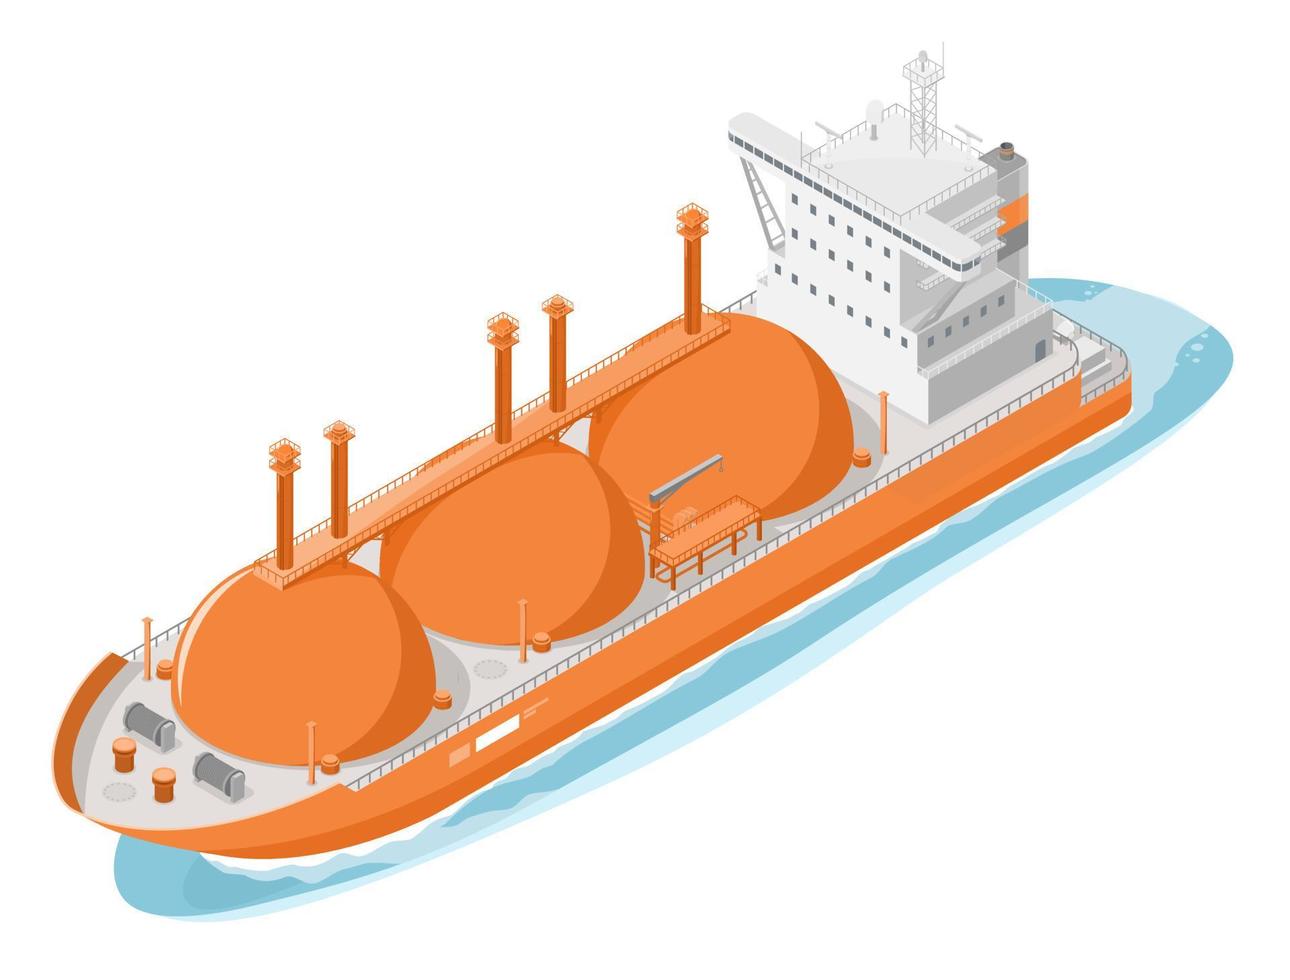 Gas and oil tank ship import export transportation of liquefied natural gas isometric cartoon orange vector isolated